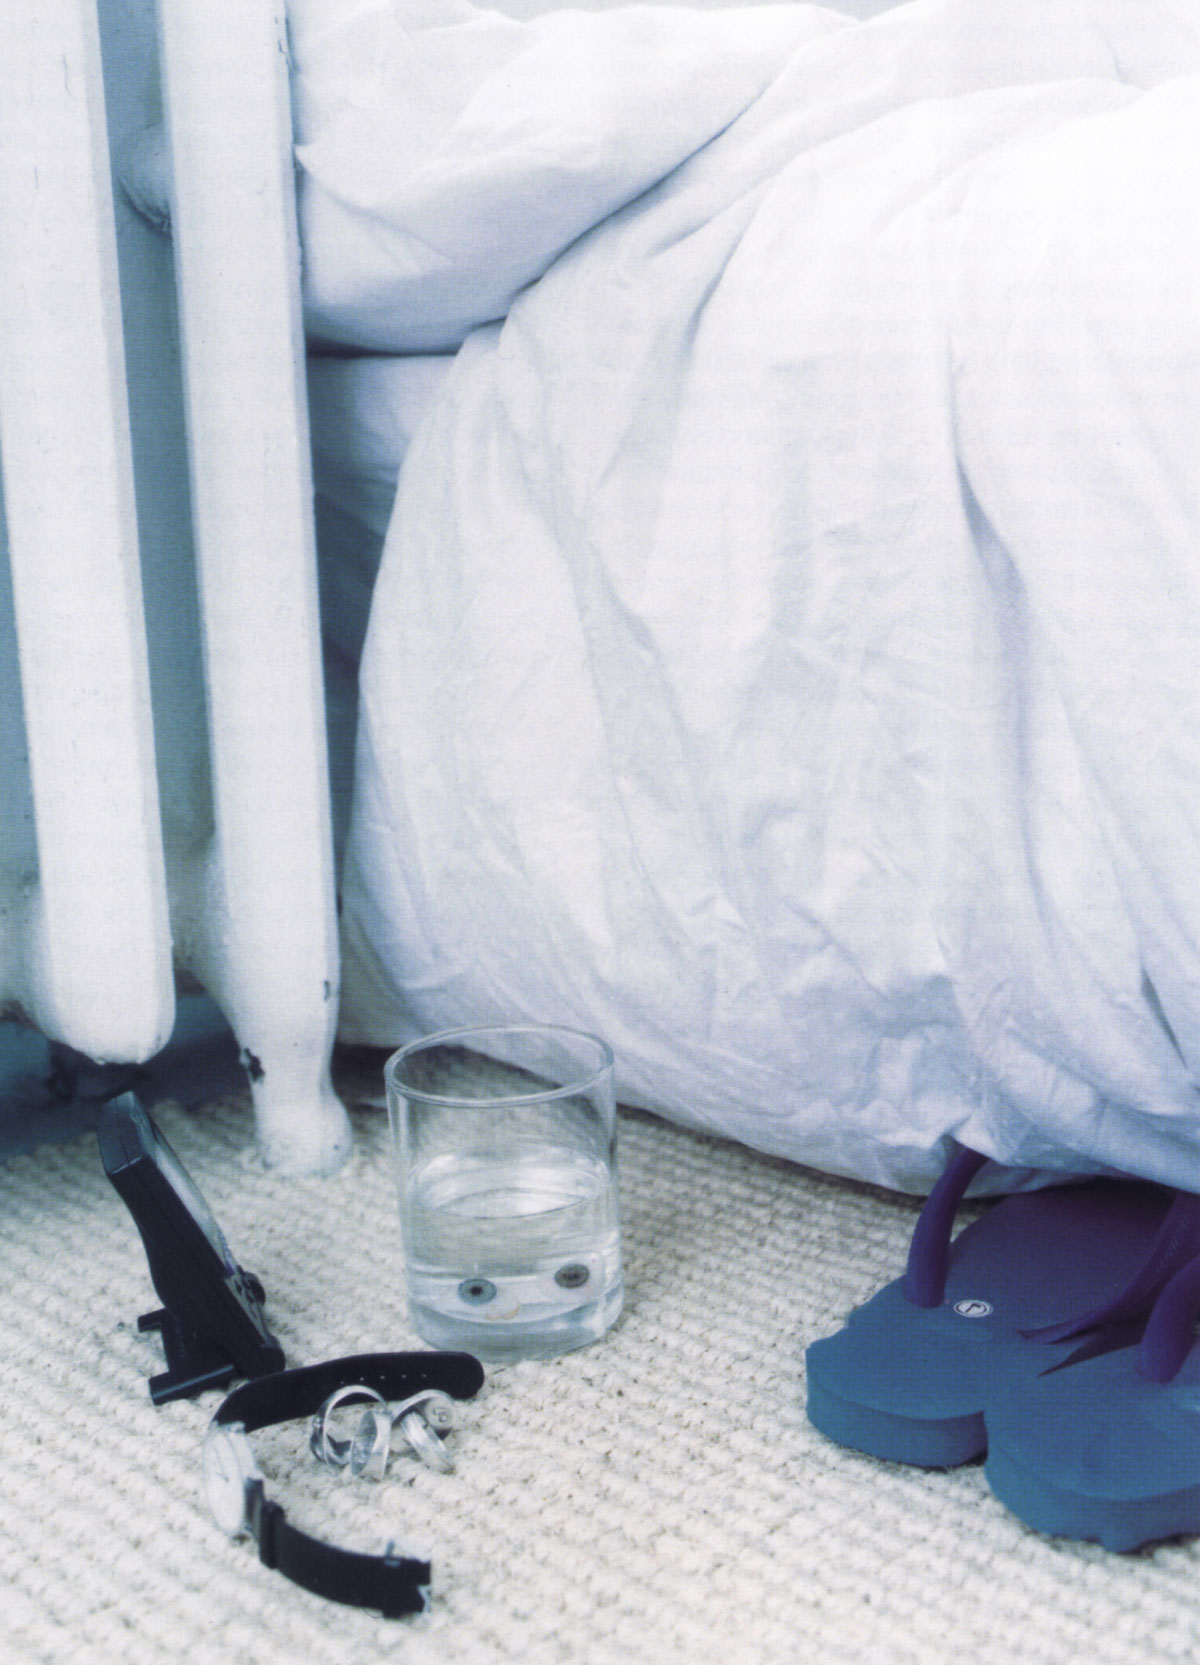 A photograph of two glass eyes floating in a tumbler of water on the floor next to a bed.